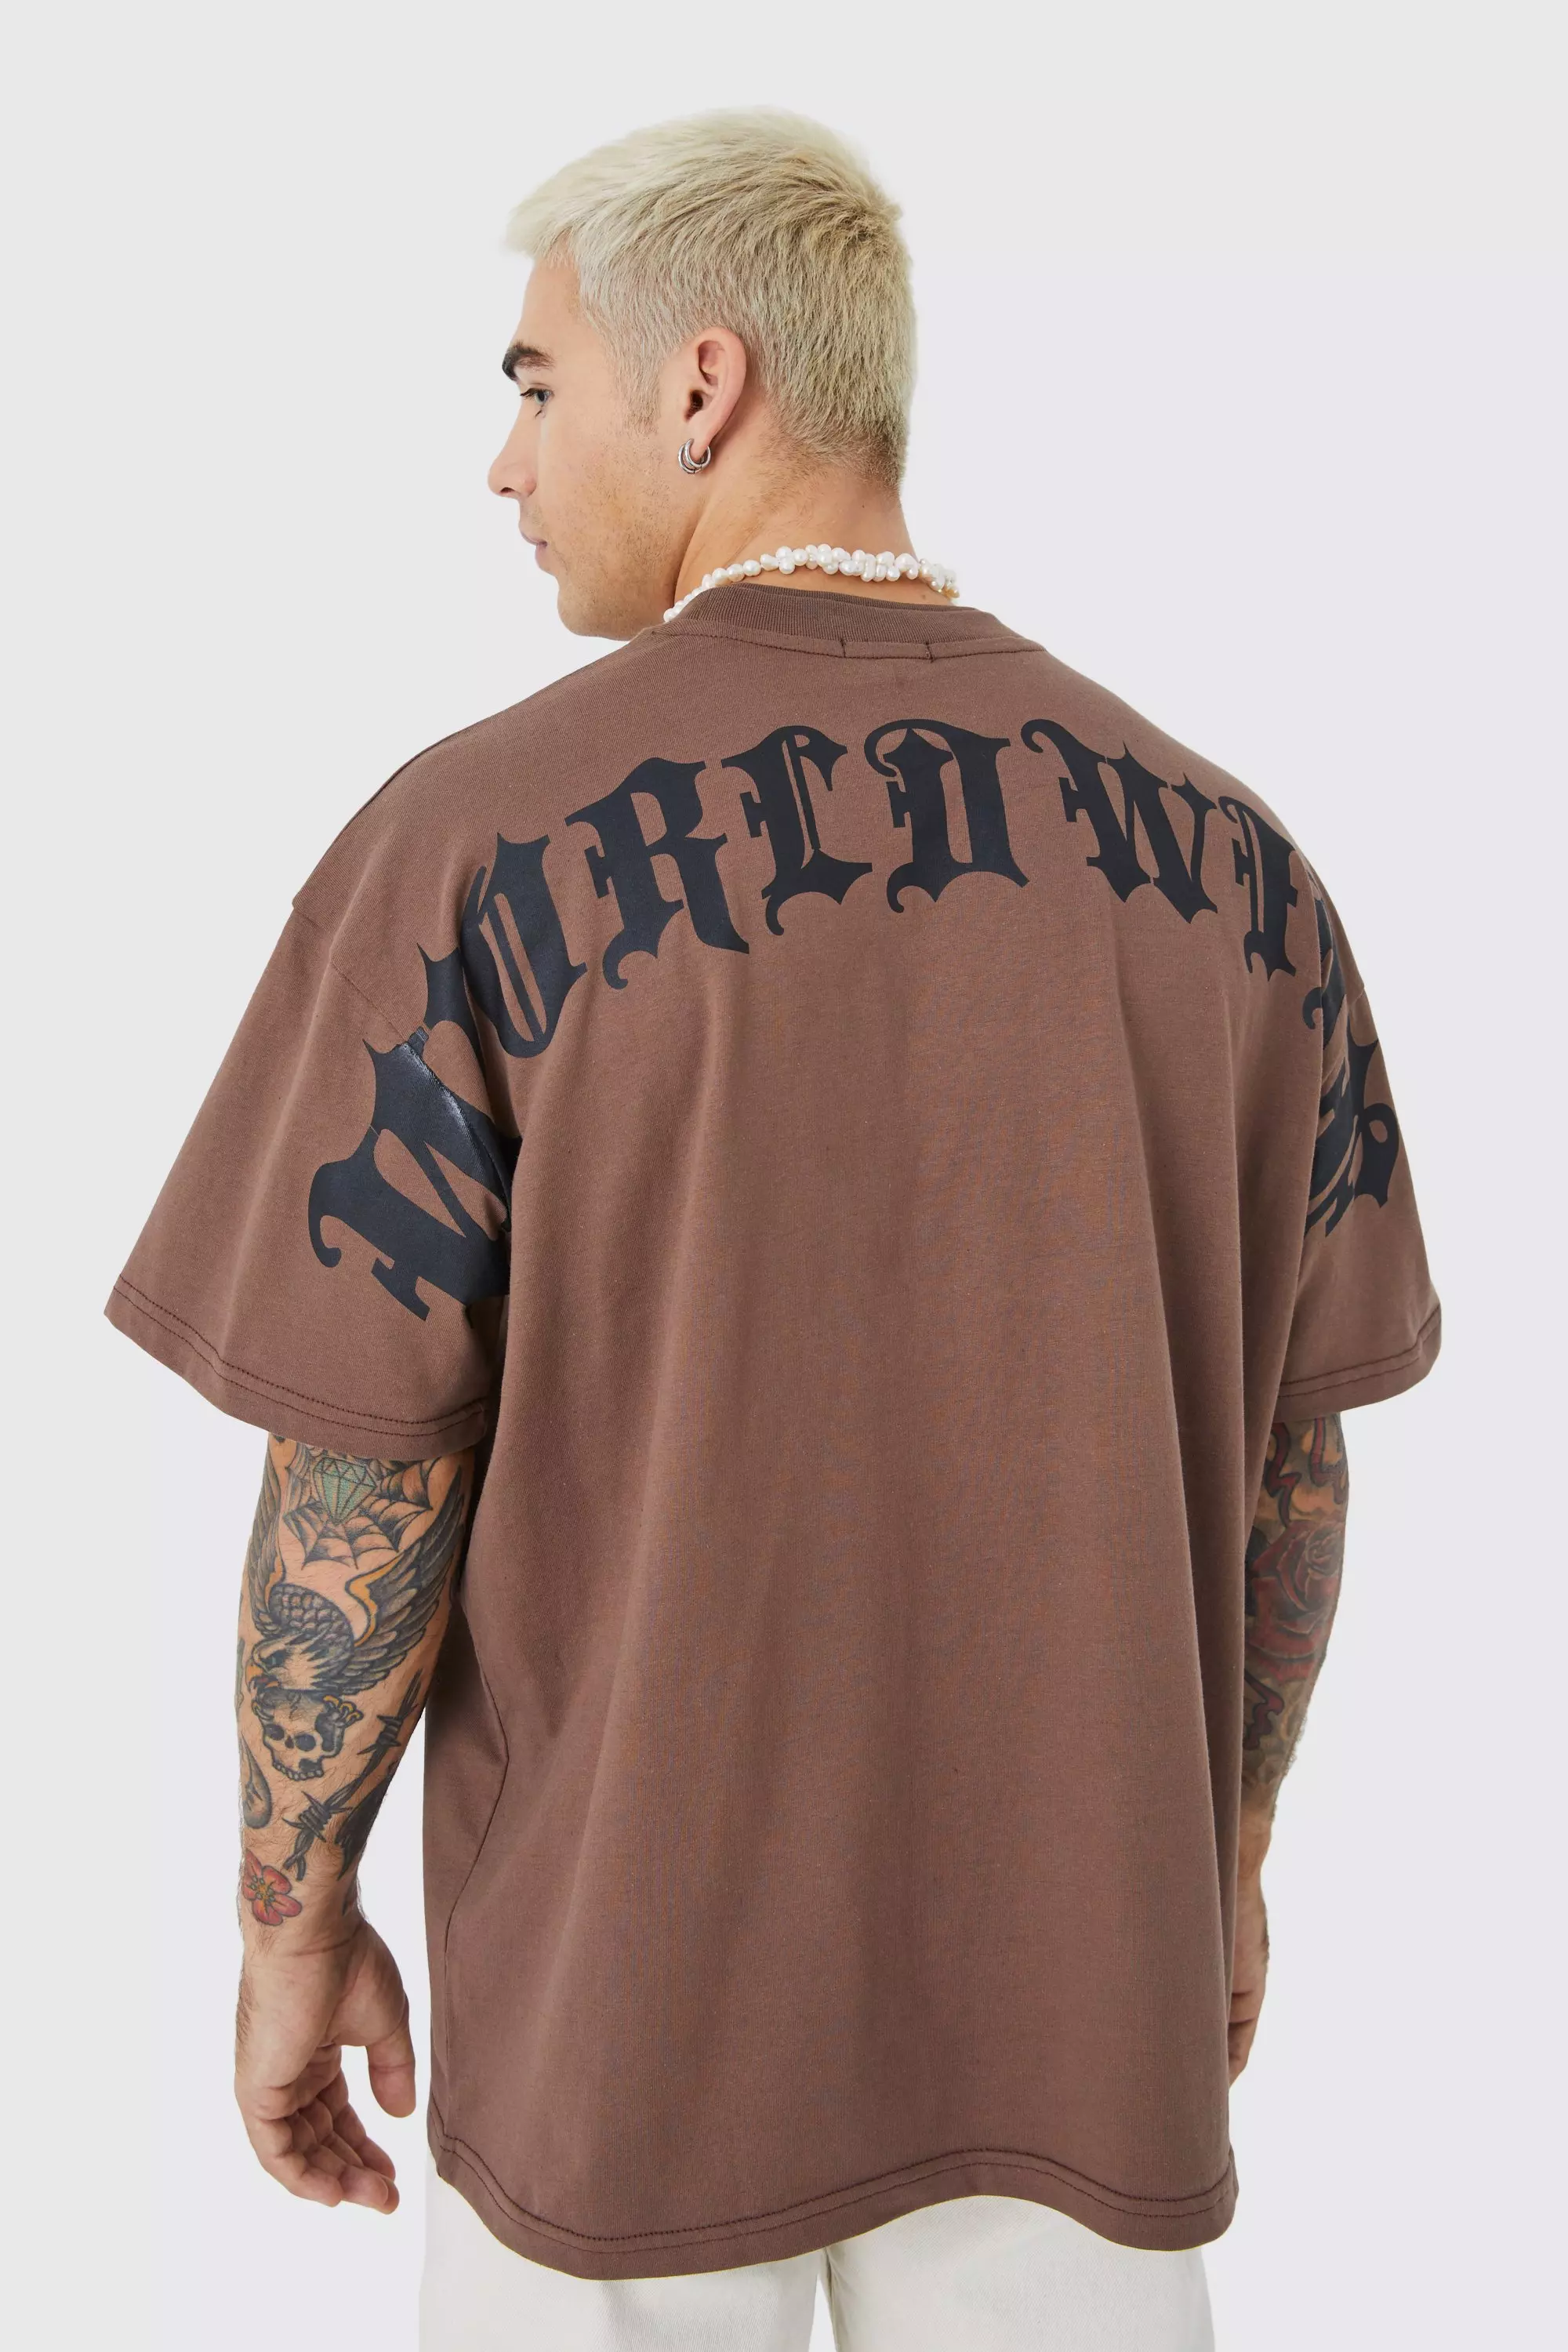 Oversize Heavy Large Text T-shirt coffee